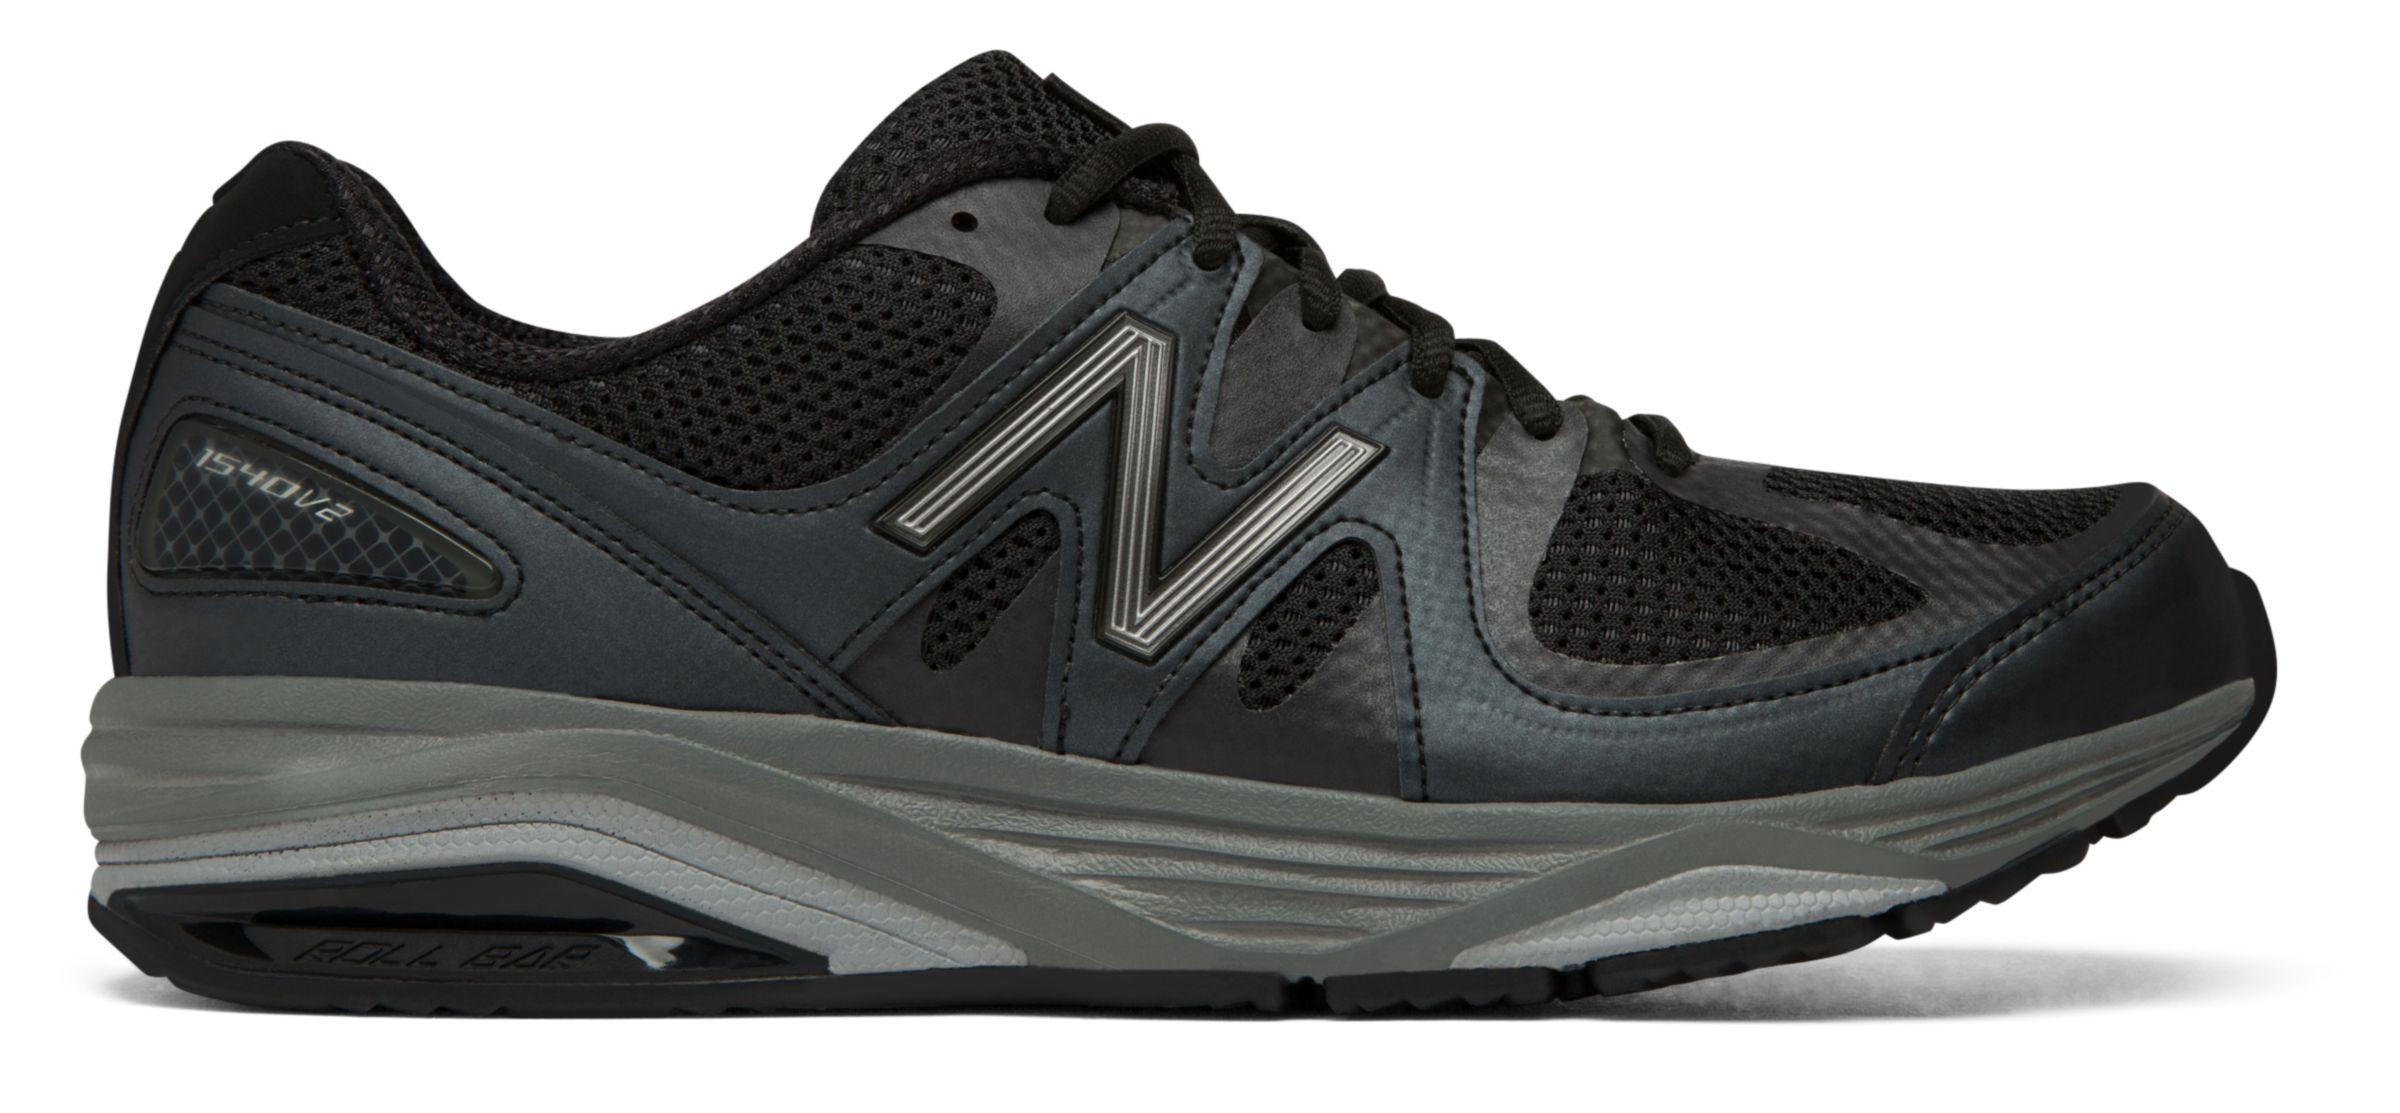 Lyst - New Balance 1540v2 Made In Us in Black for Men - Save 51. ...